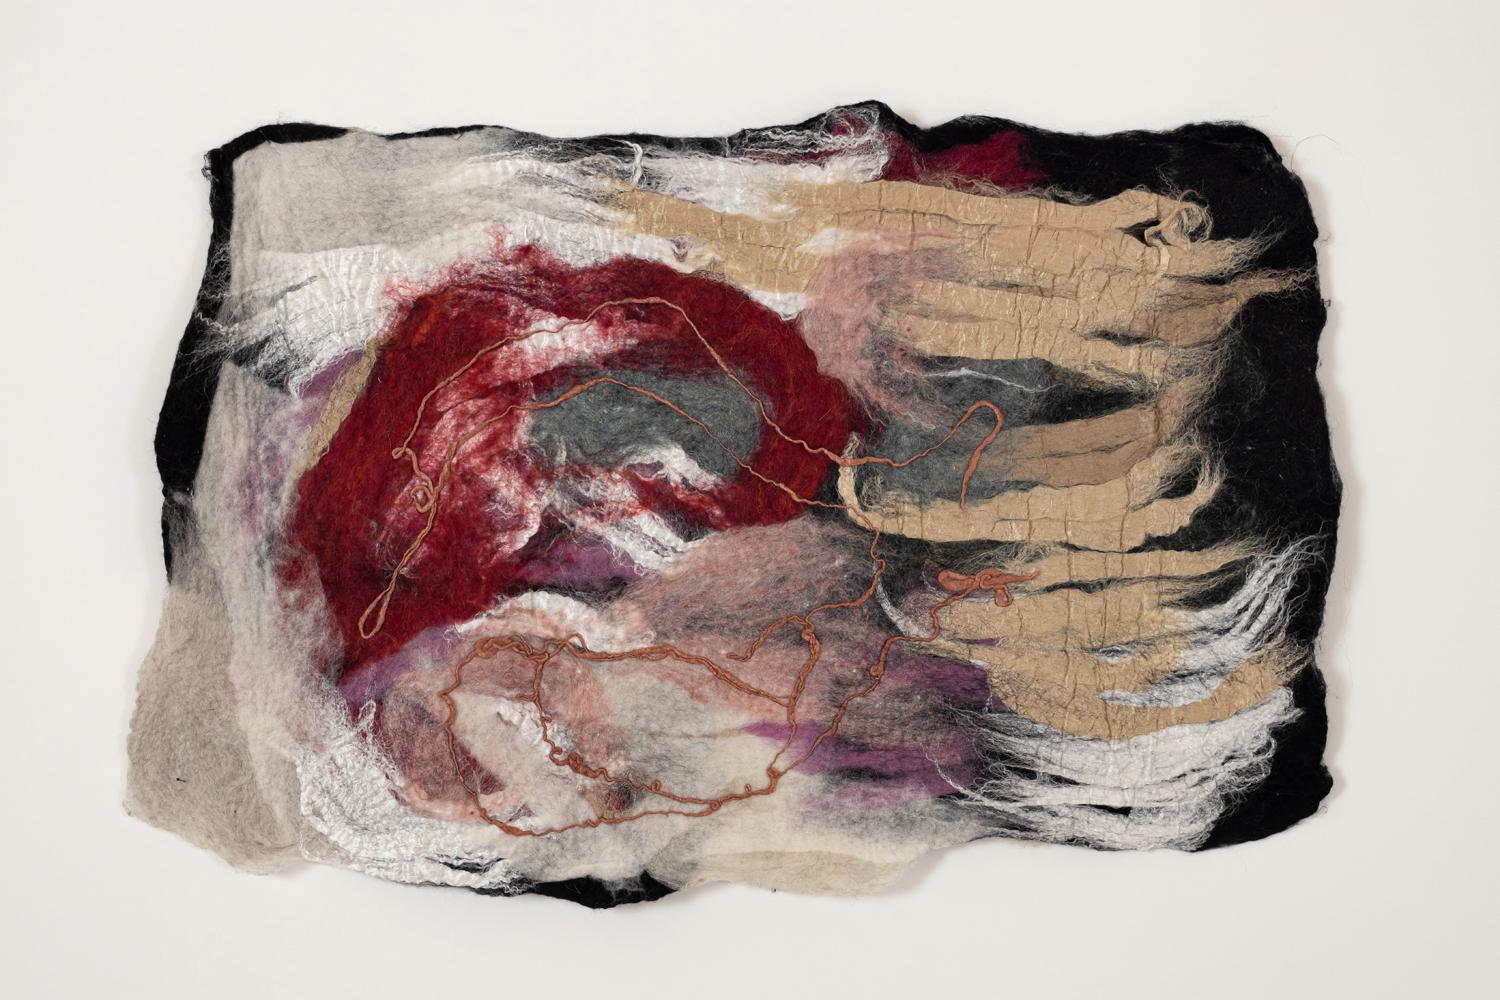 Guernica de la Ecologia, Estudio en Color 1 Tapestry by Claudy Jongstra
Dimensions: W 90 x H 60 cm.
Materials: Wool Merino, Drenth Heath, Raw Silks, Cotton Gauze.

Claudy Jongstra is known worldwide for her monumental artworks and architectural